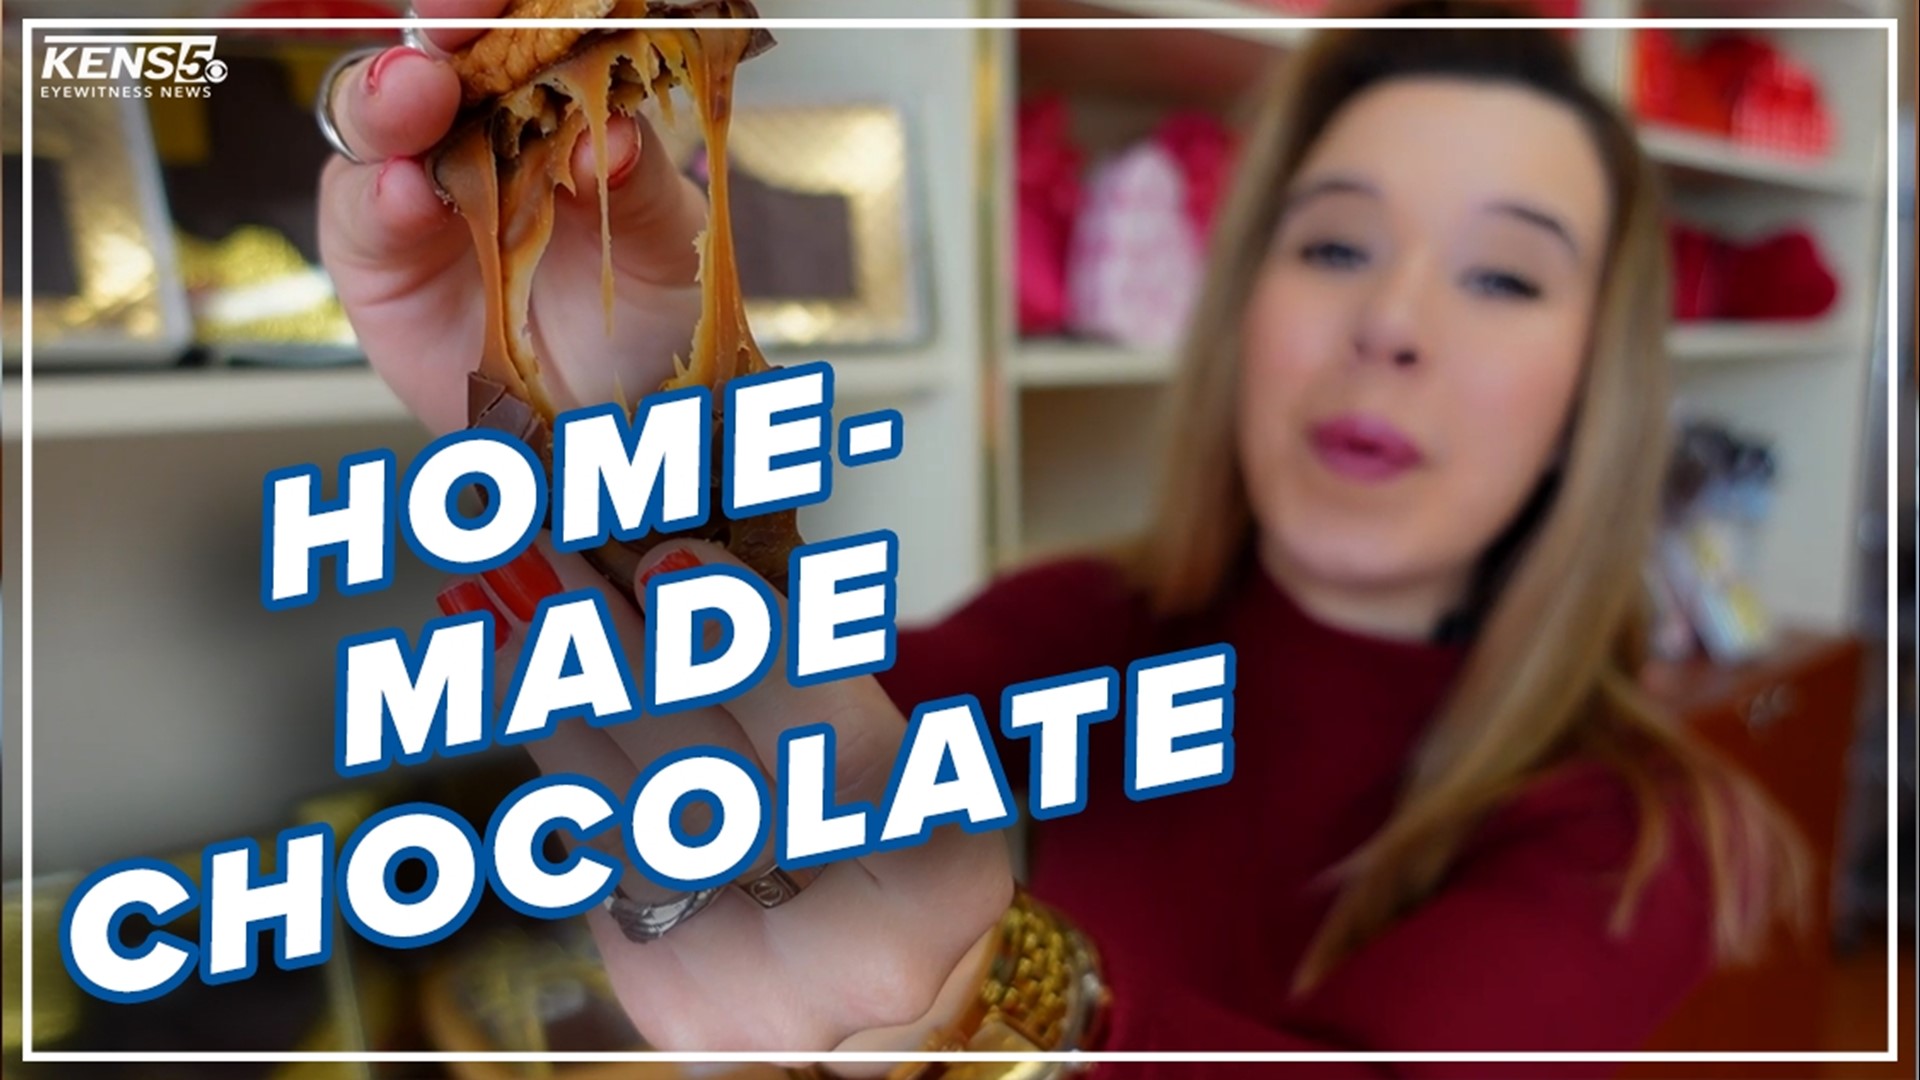 Opened in 2005, Scott and Lisa make chocolate at Alamo City Chocolate Factory. And you don't need a "golden ticket" to visit! Lexi Hazlett takes you there.